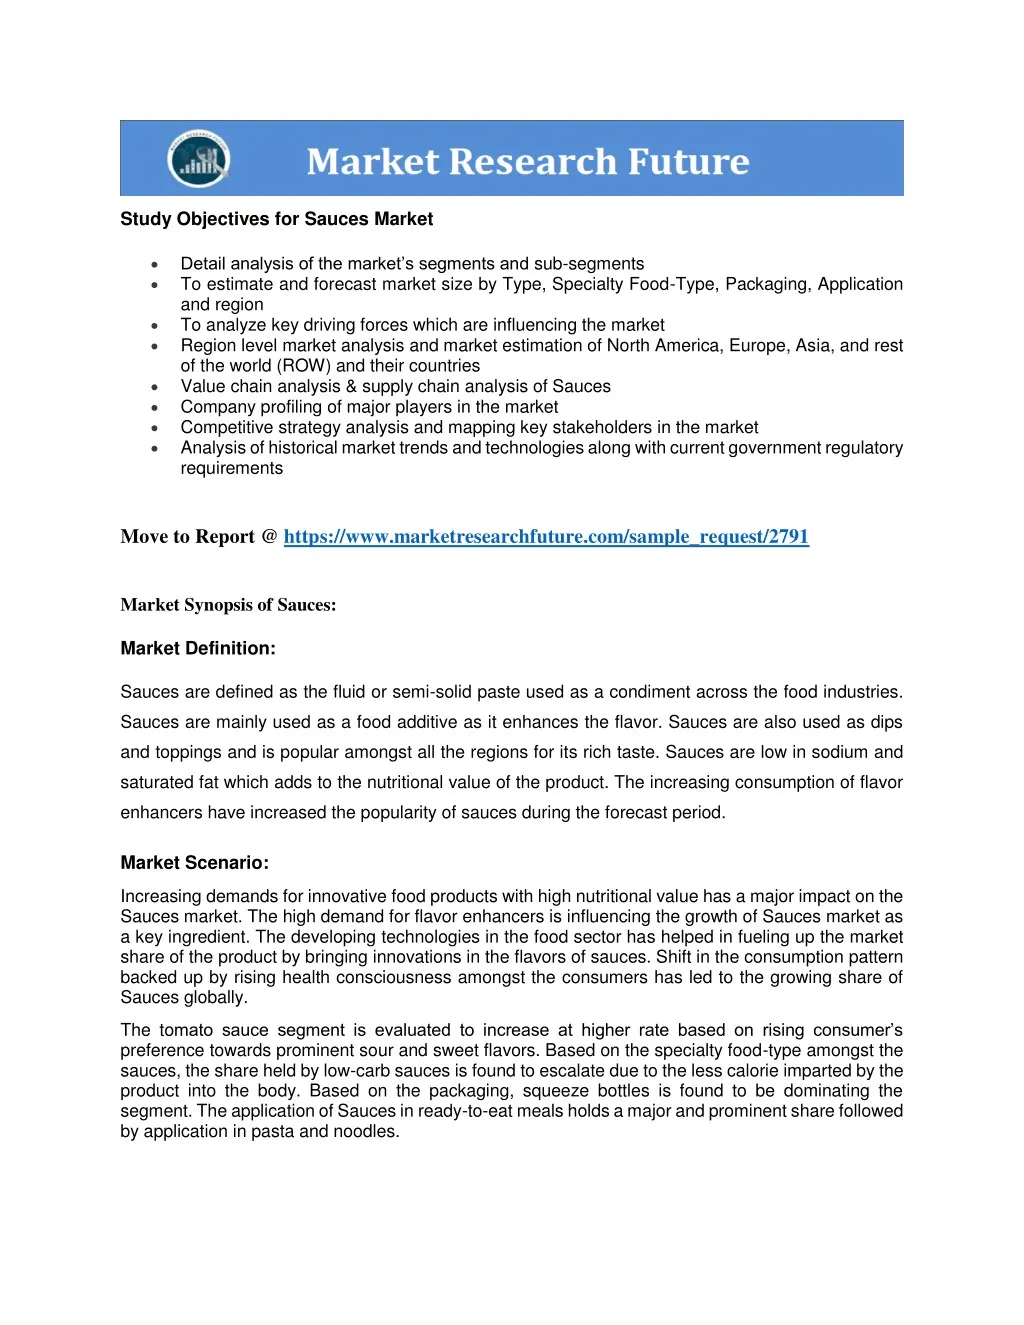 study objectives for sauces market